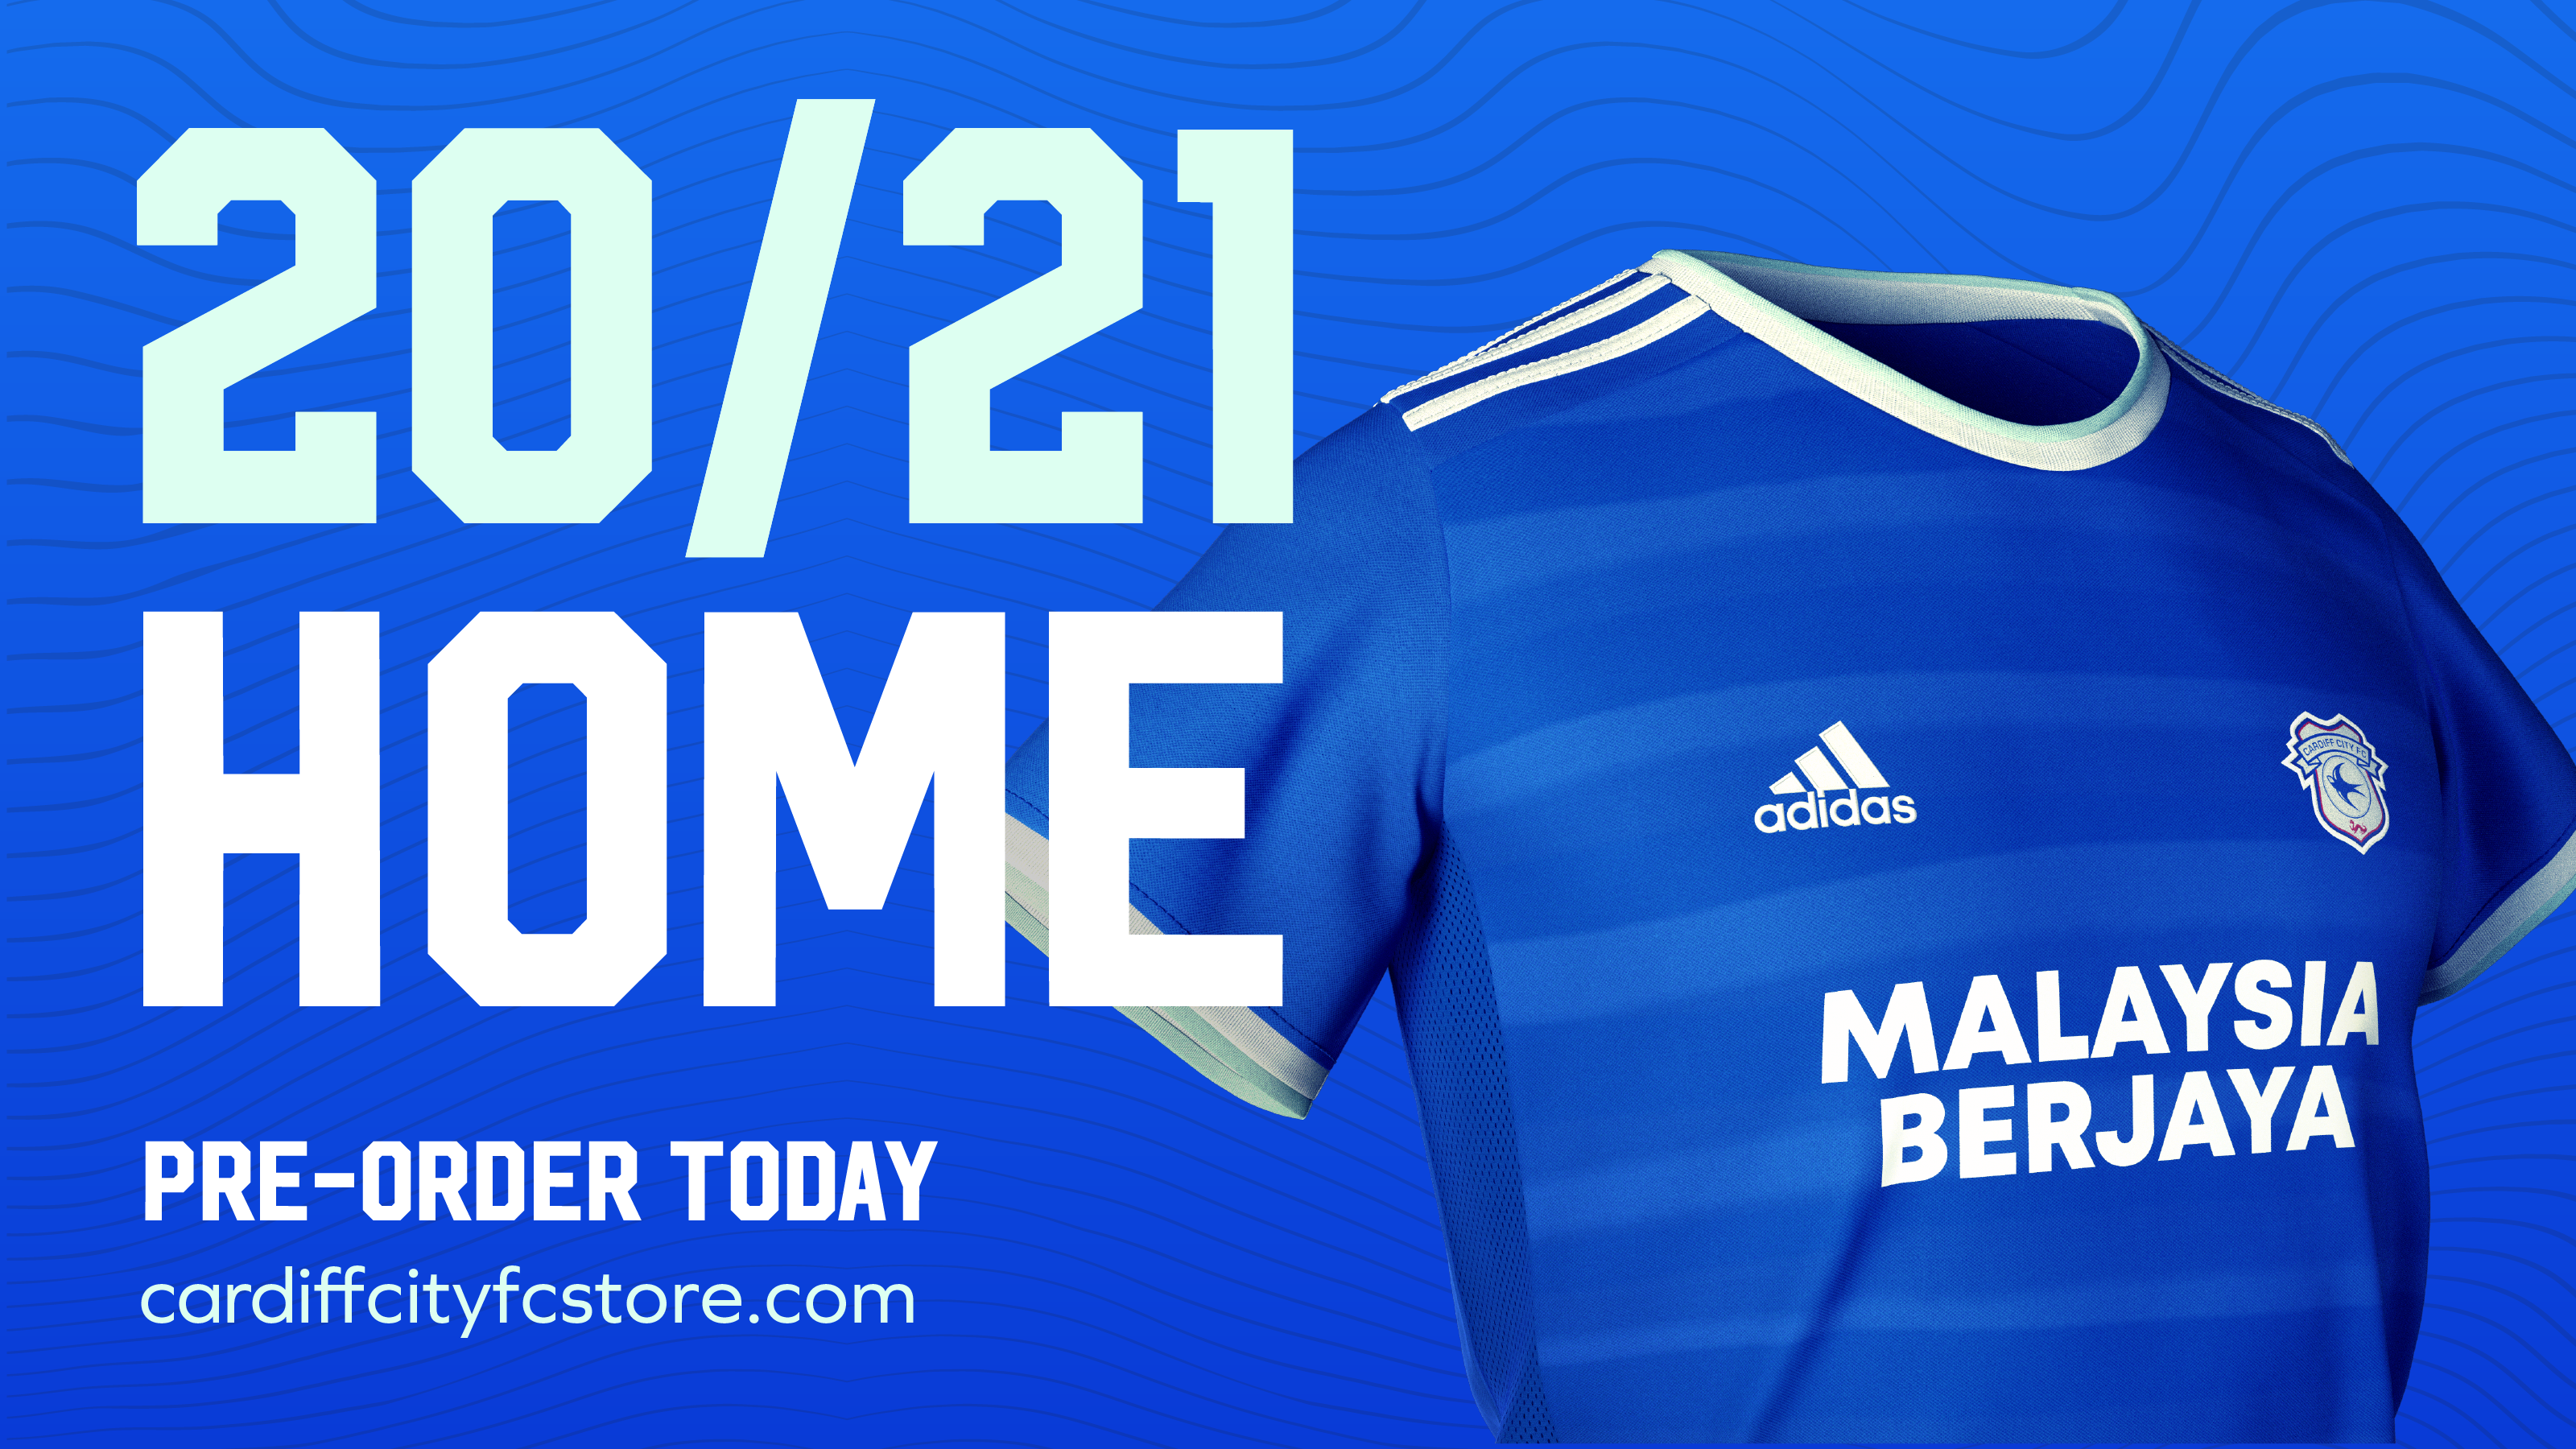 2020/21 Home & Away Kit, Pre-Order now!